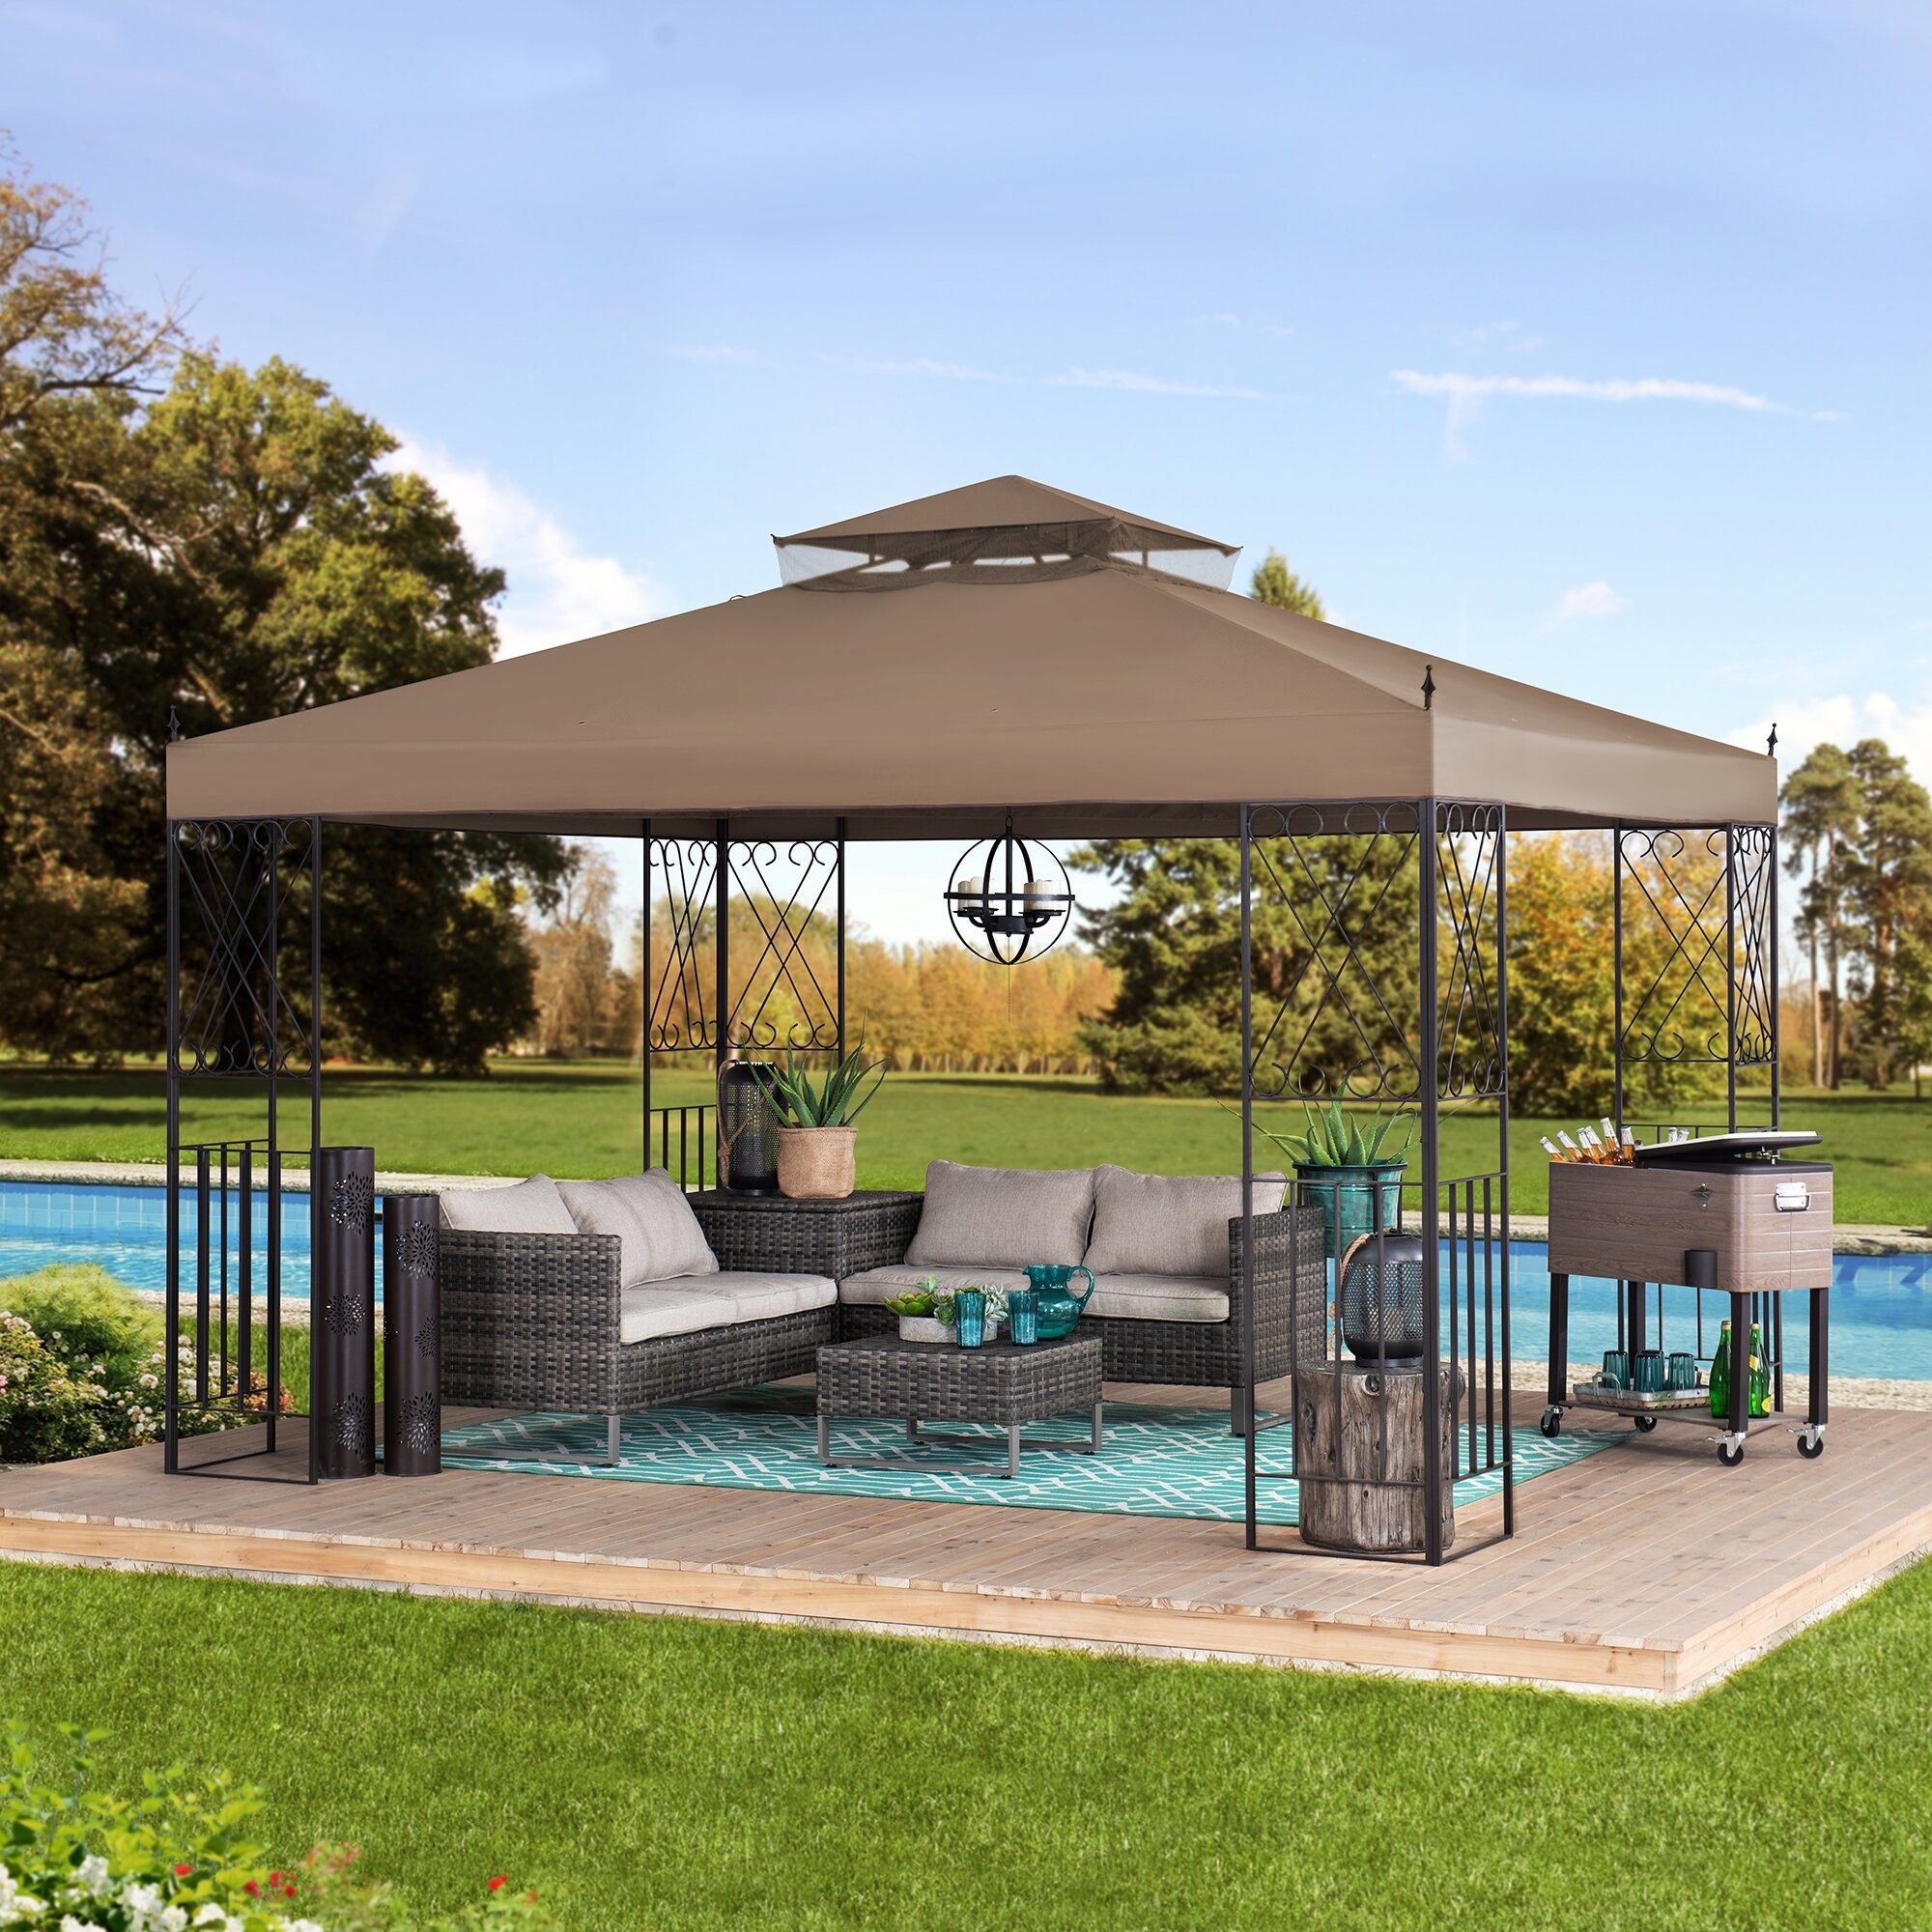 the brown gazebo which has a two-tier roof for extra airflow